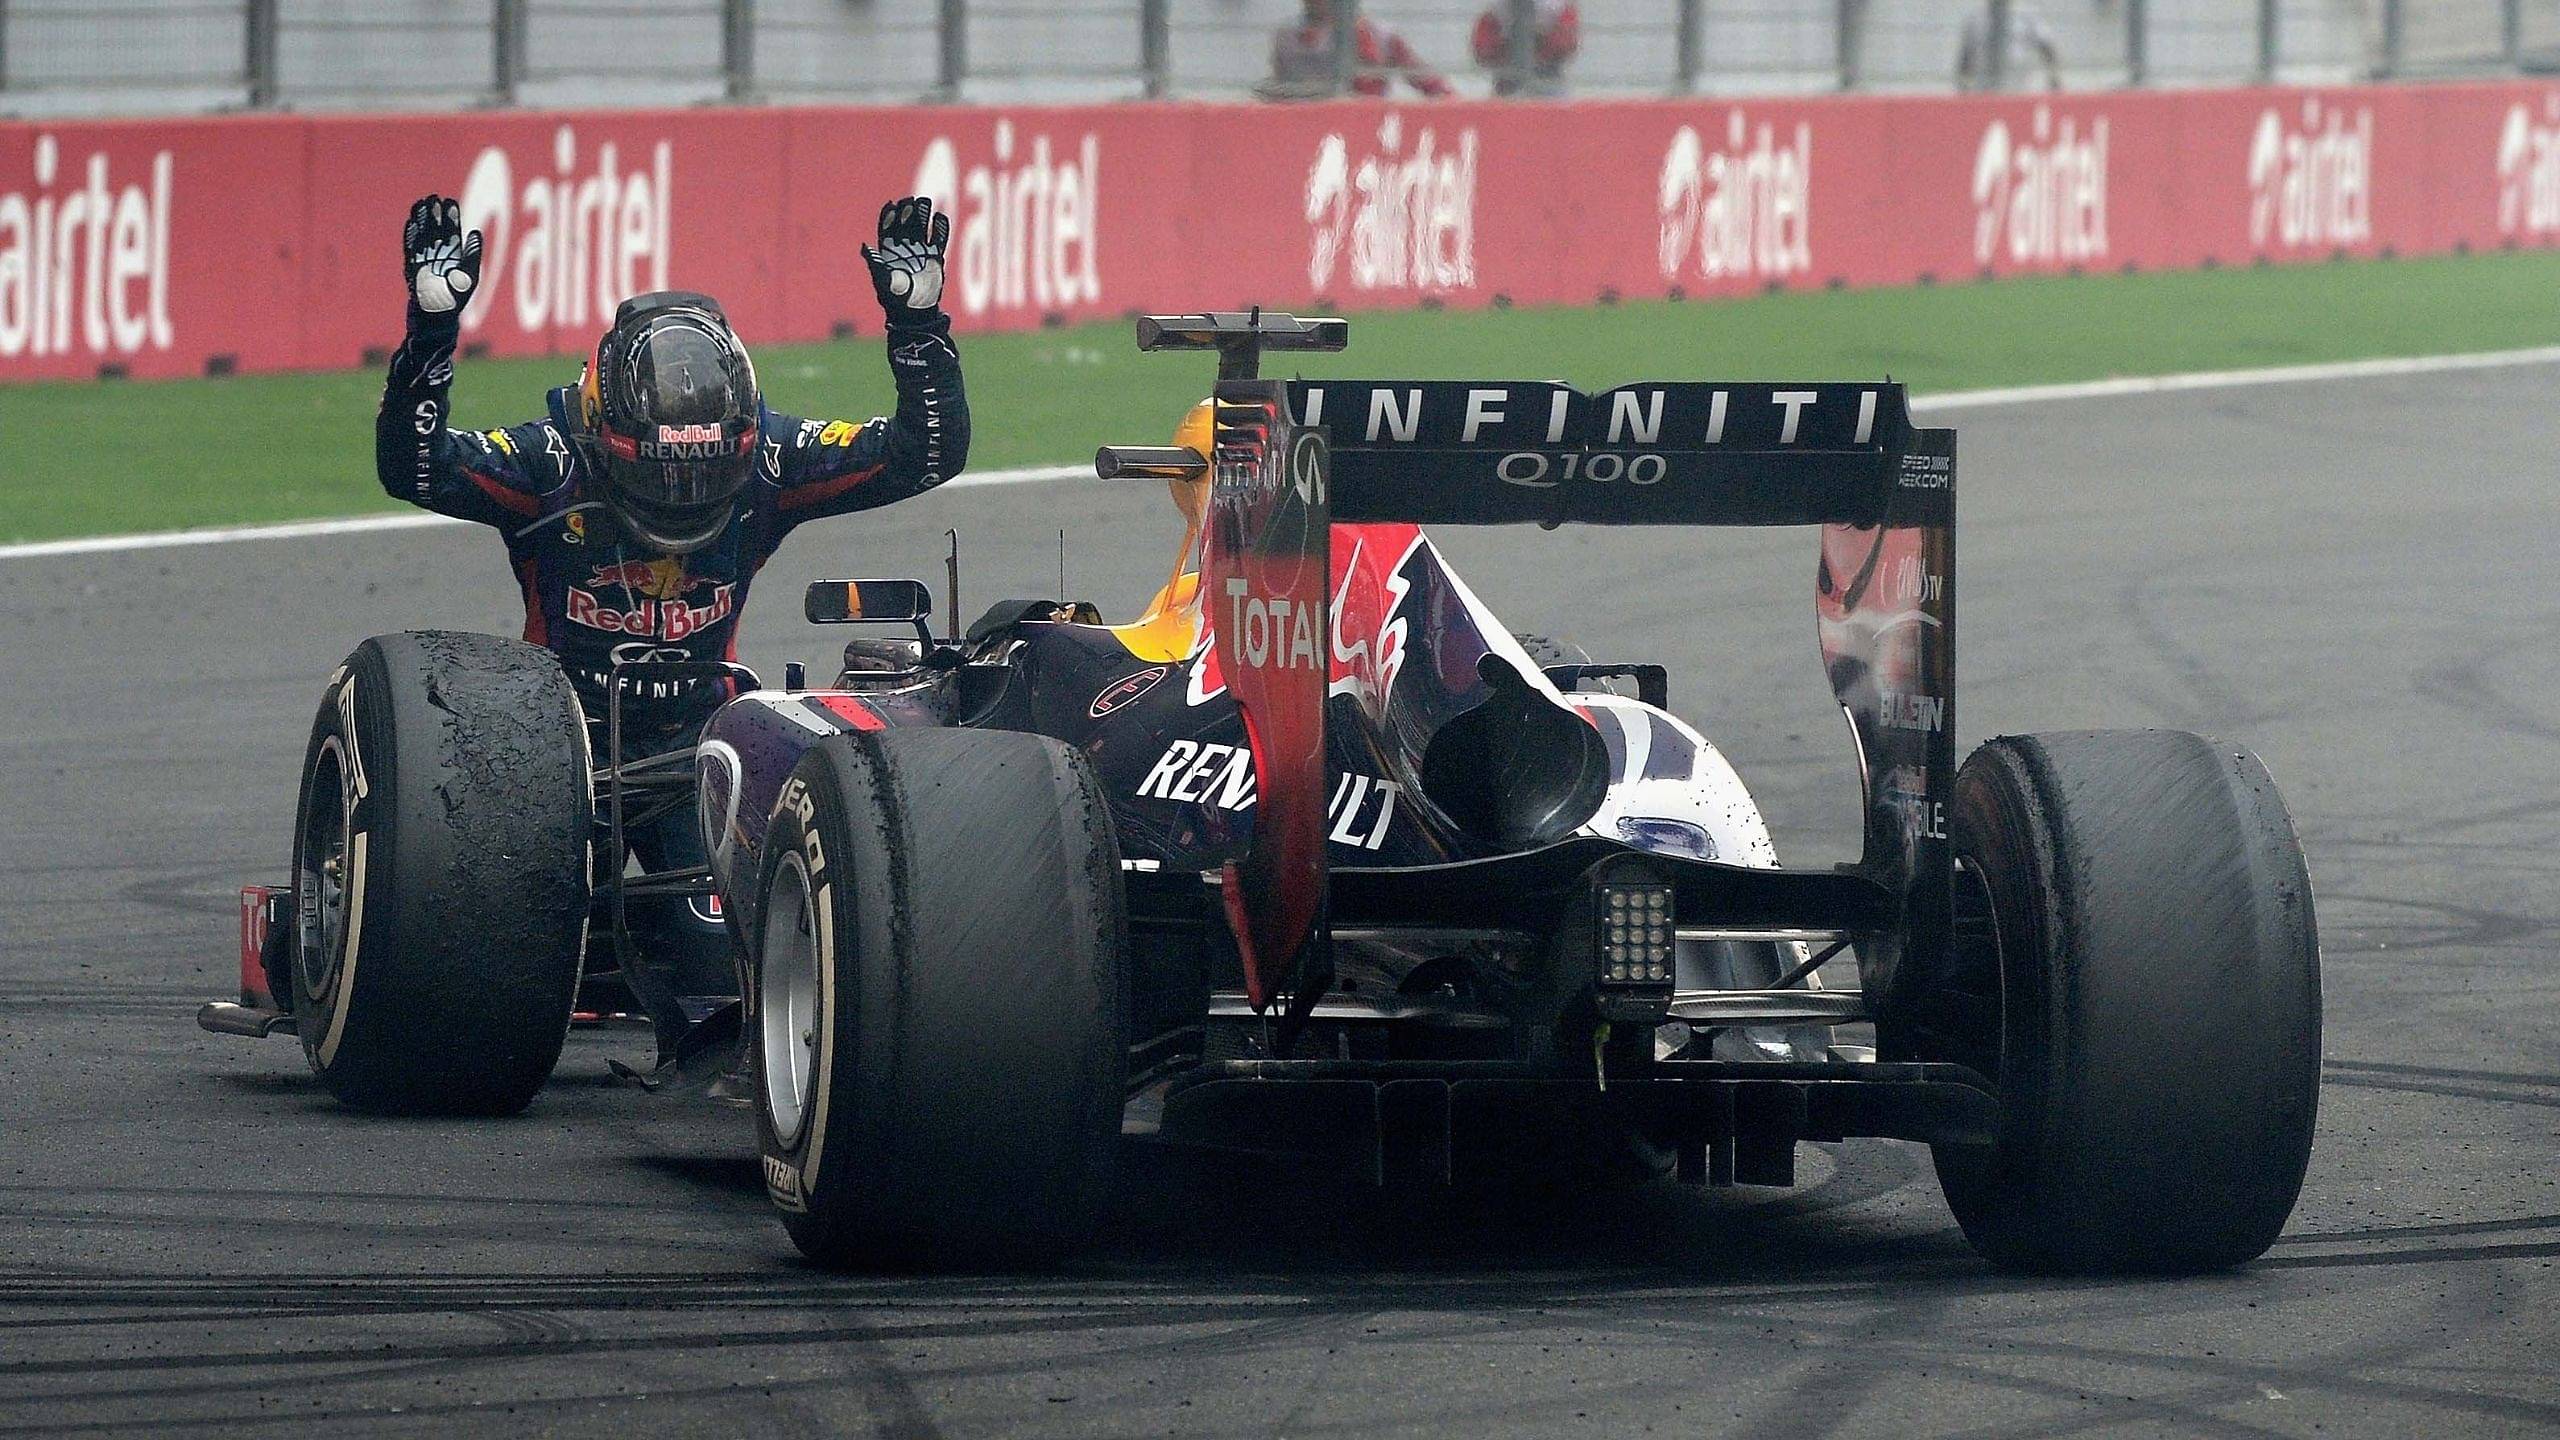 Motorsports in India: Formula 3 racing track coming up in Andhra Pradesh, pending FIA approval